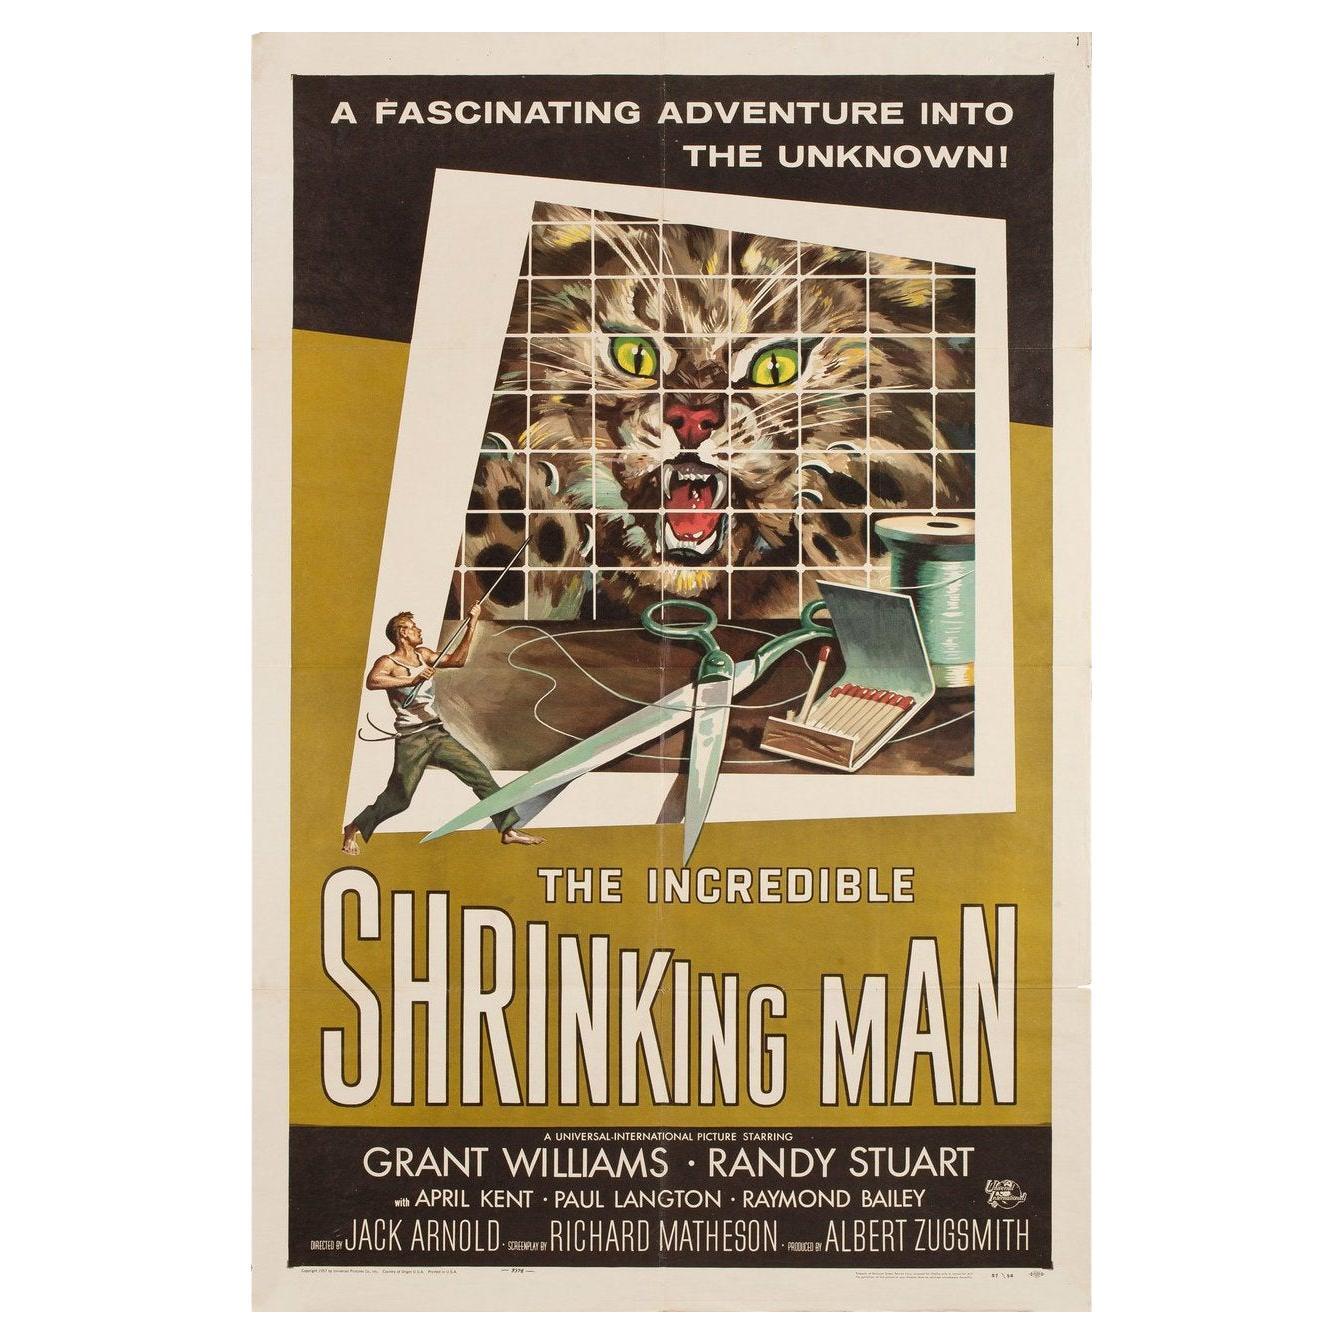 The Incredible Shrinking Man 1957 U.S. One Sheet Film Poster